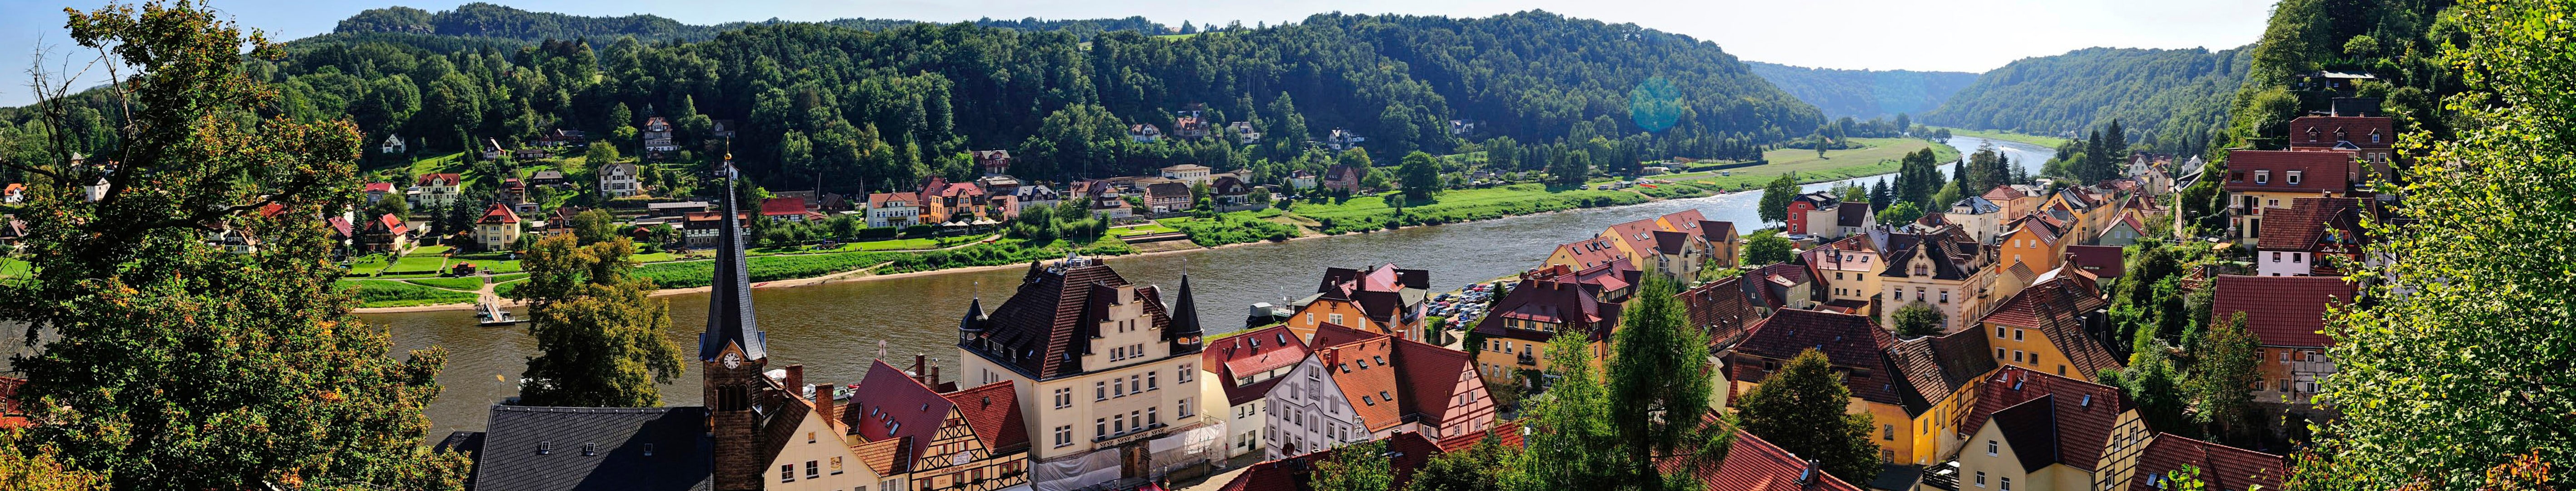 Germany, Europe, river, town, hills, mountains, water, grass